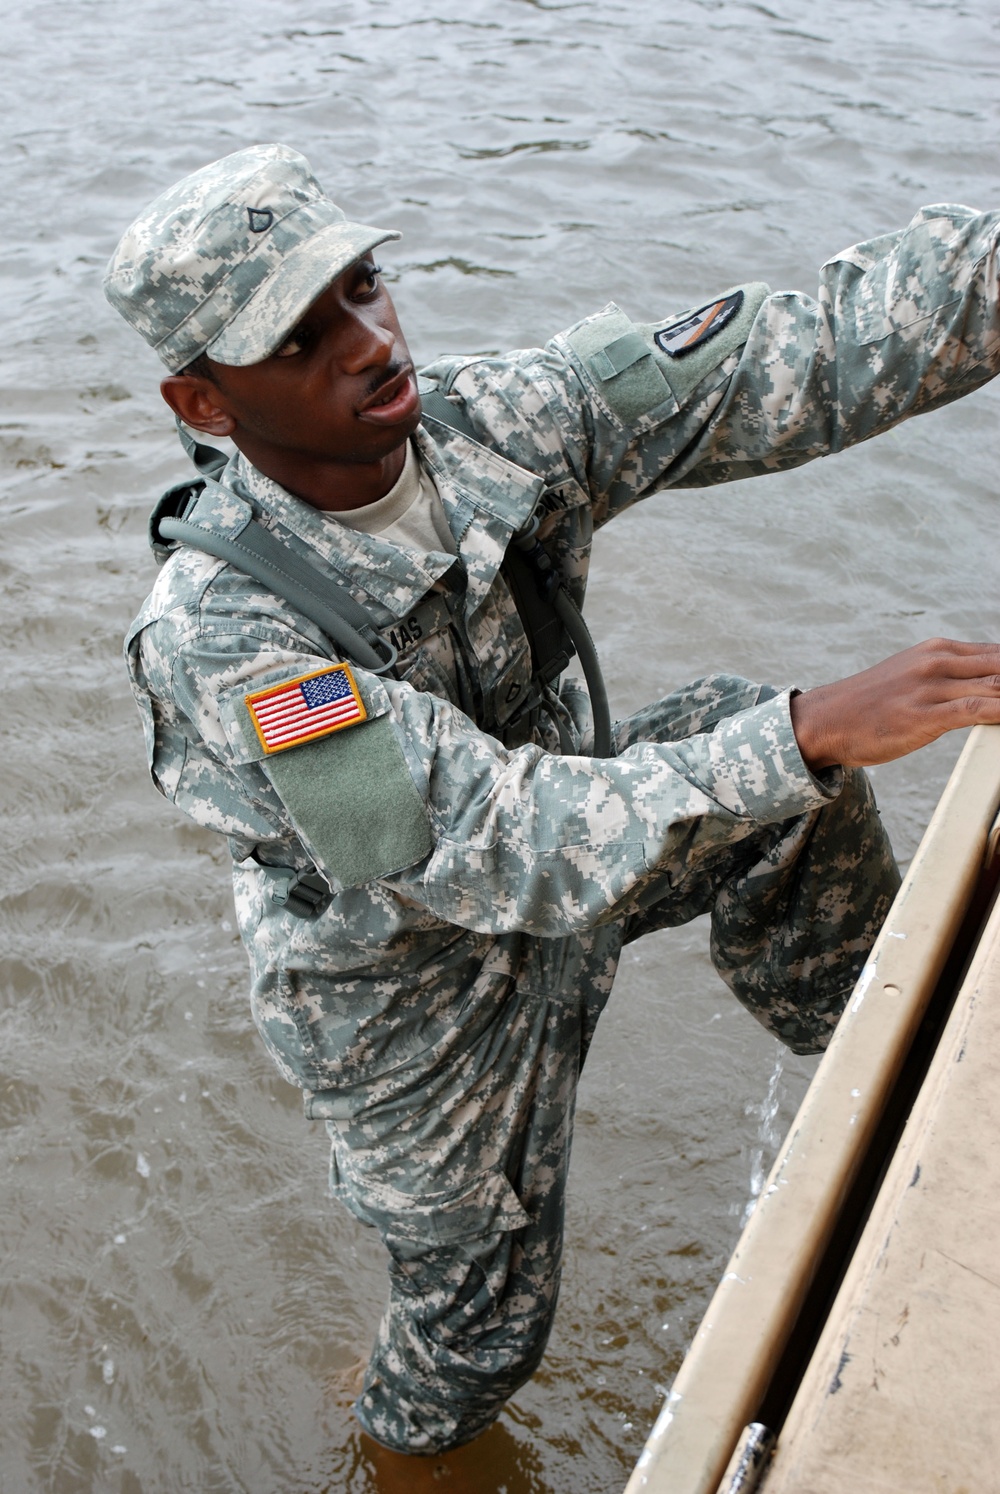 Louisiana National Guard Performs Search and Rescue in Lake Charles, La.